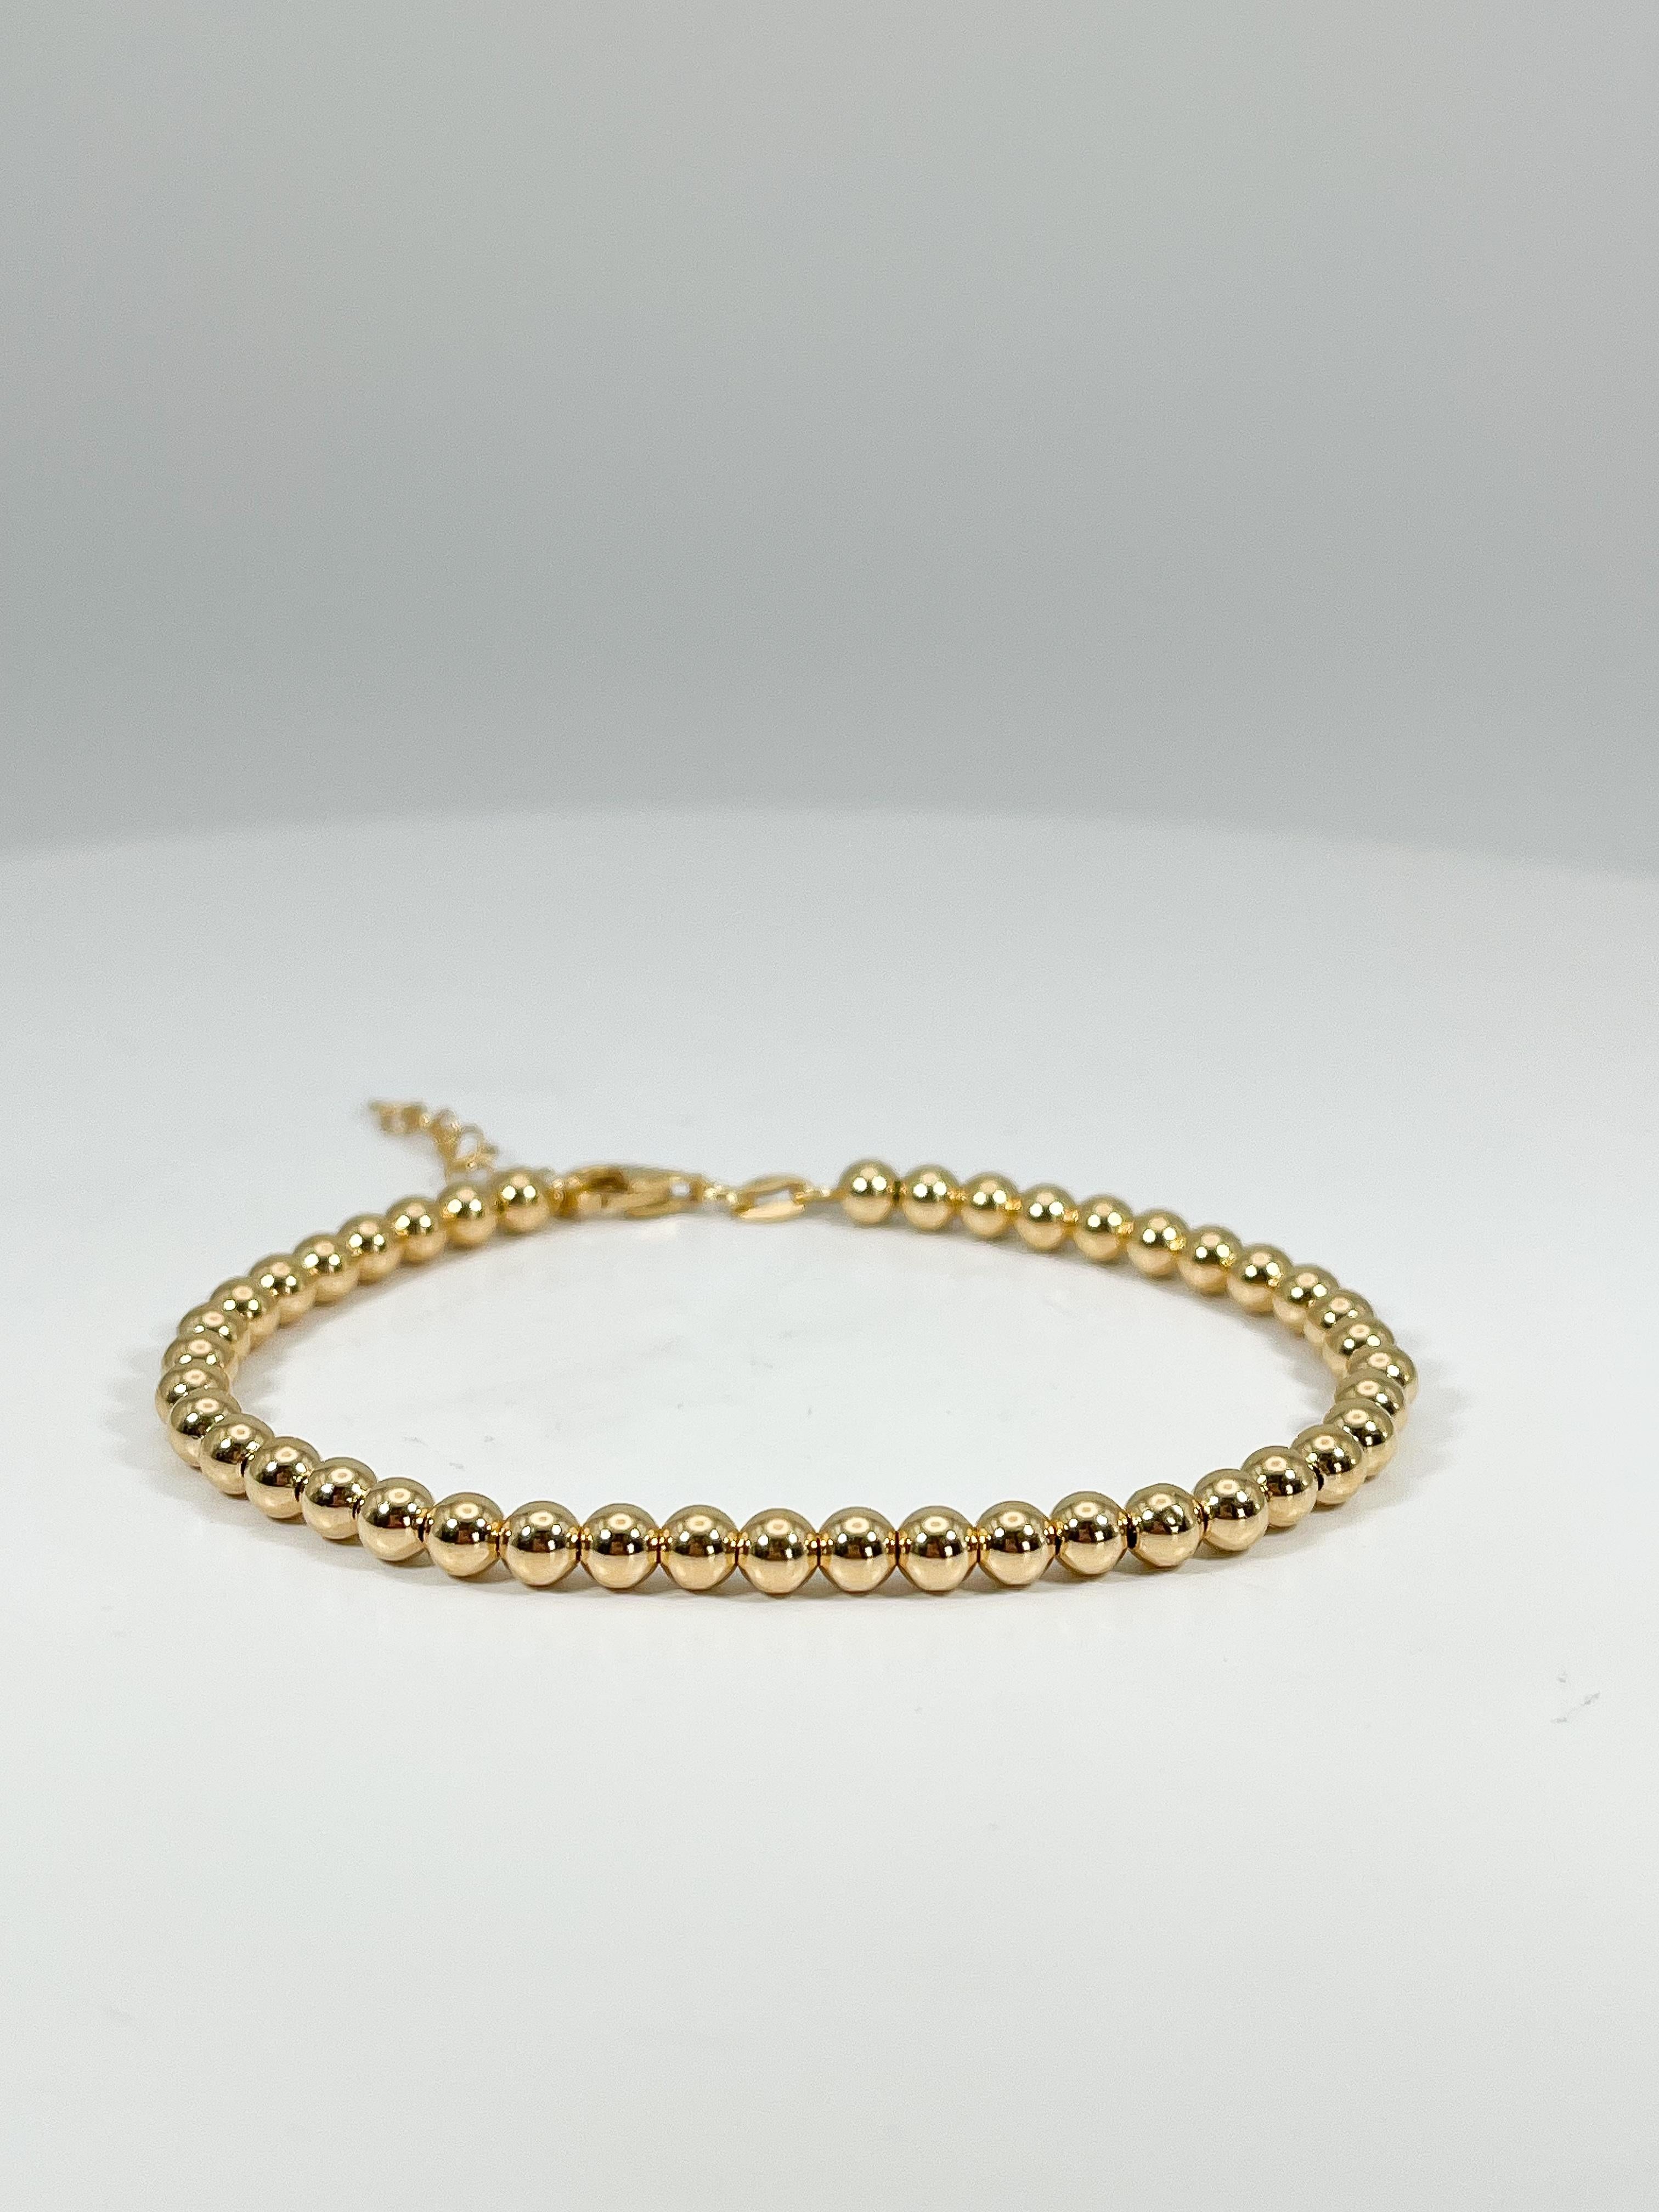 14k yellow gold 4 mm beaded bracelet. This bracelet has a lobster clasp for wearing, the length of the bracelet is 8 inches long, but is adjustable, the total weight is 3.1 grams.